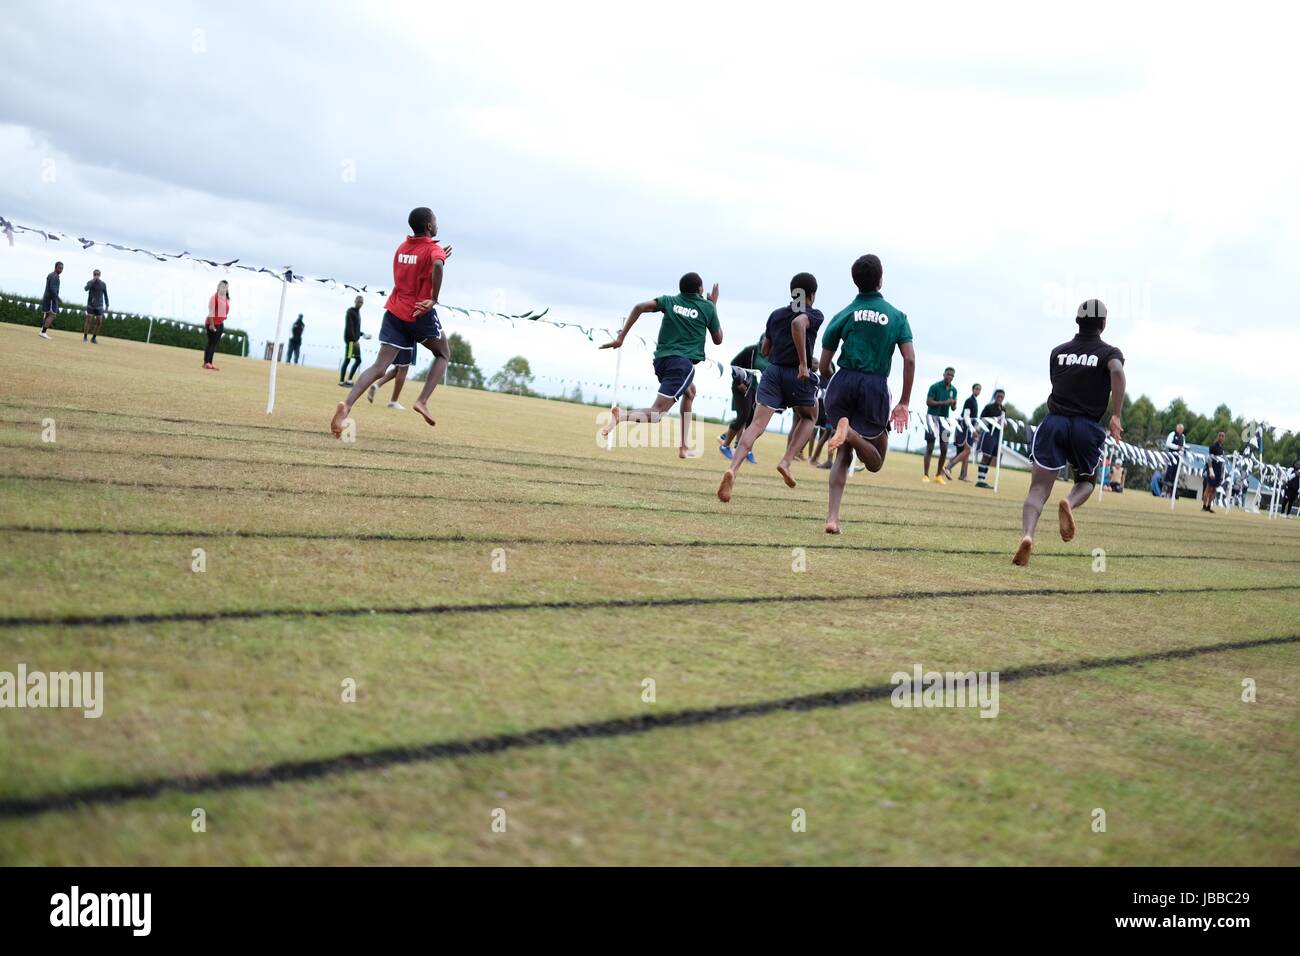 Students sprint barefoot athletic race on grass track in Kenya Stock Photo